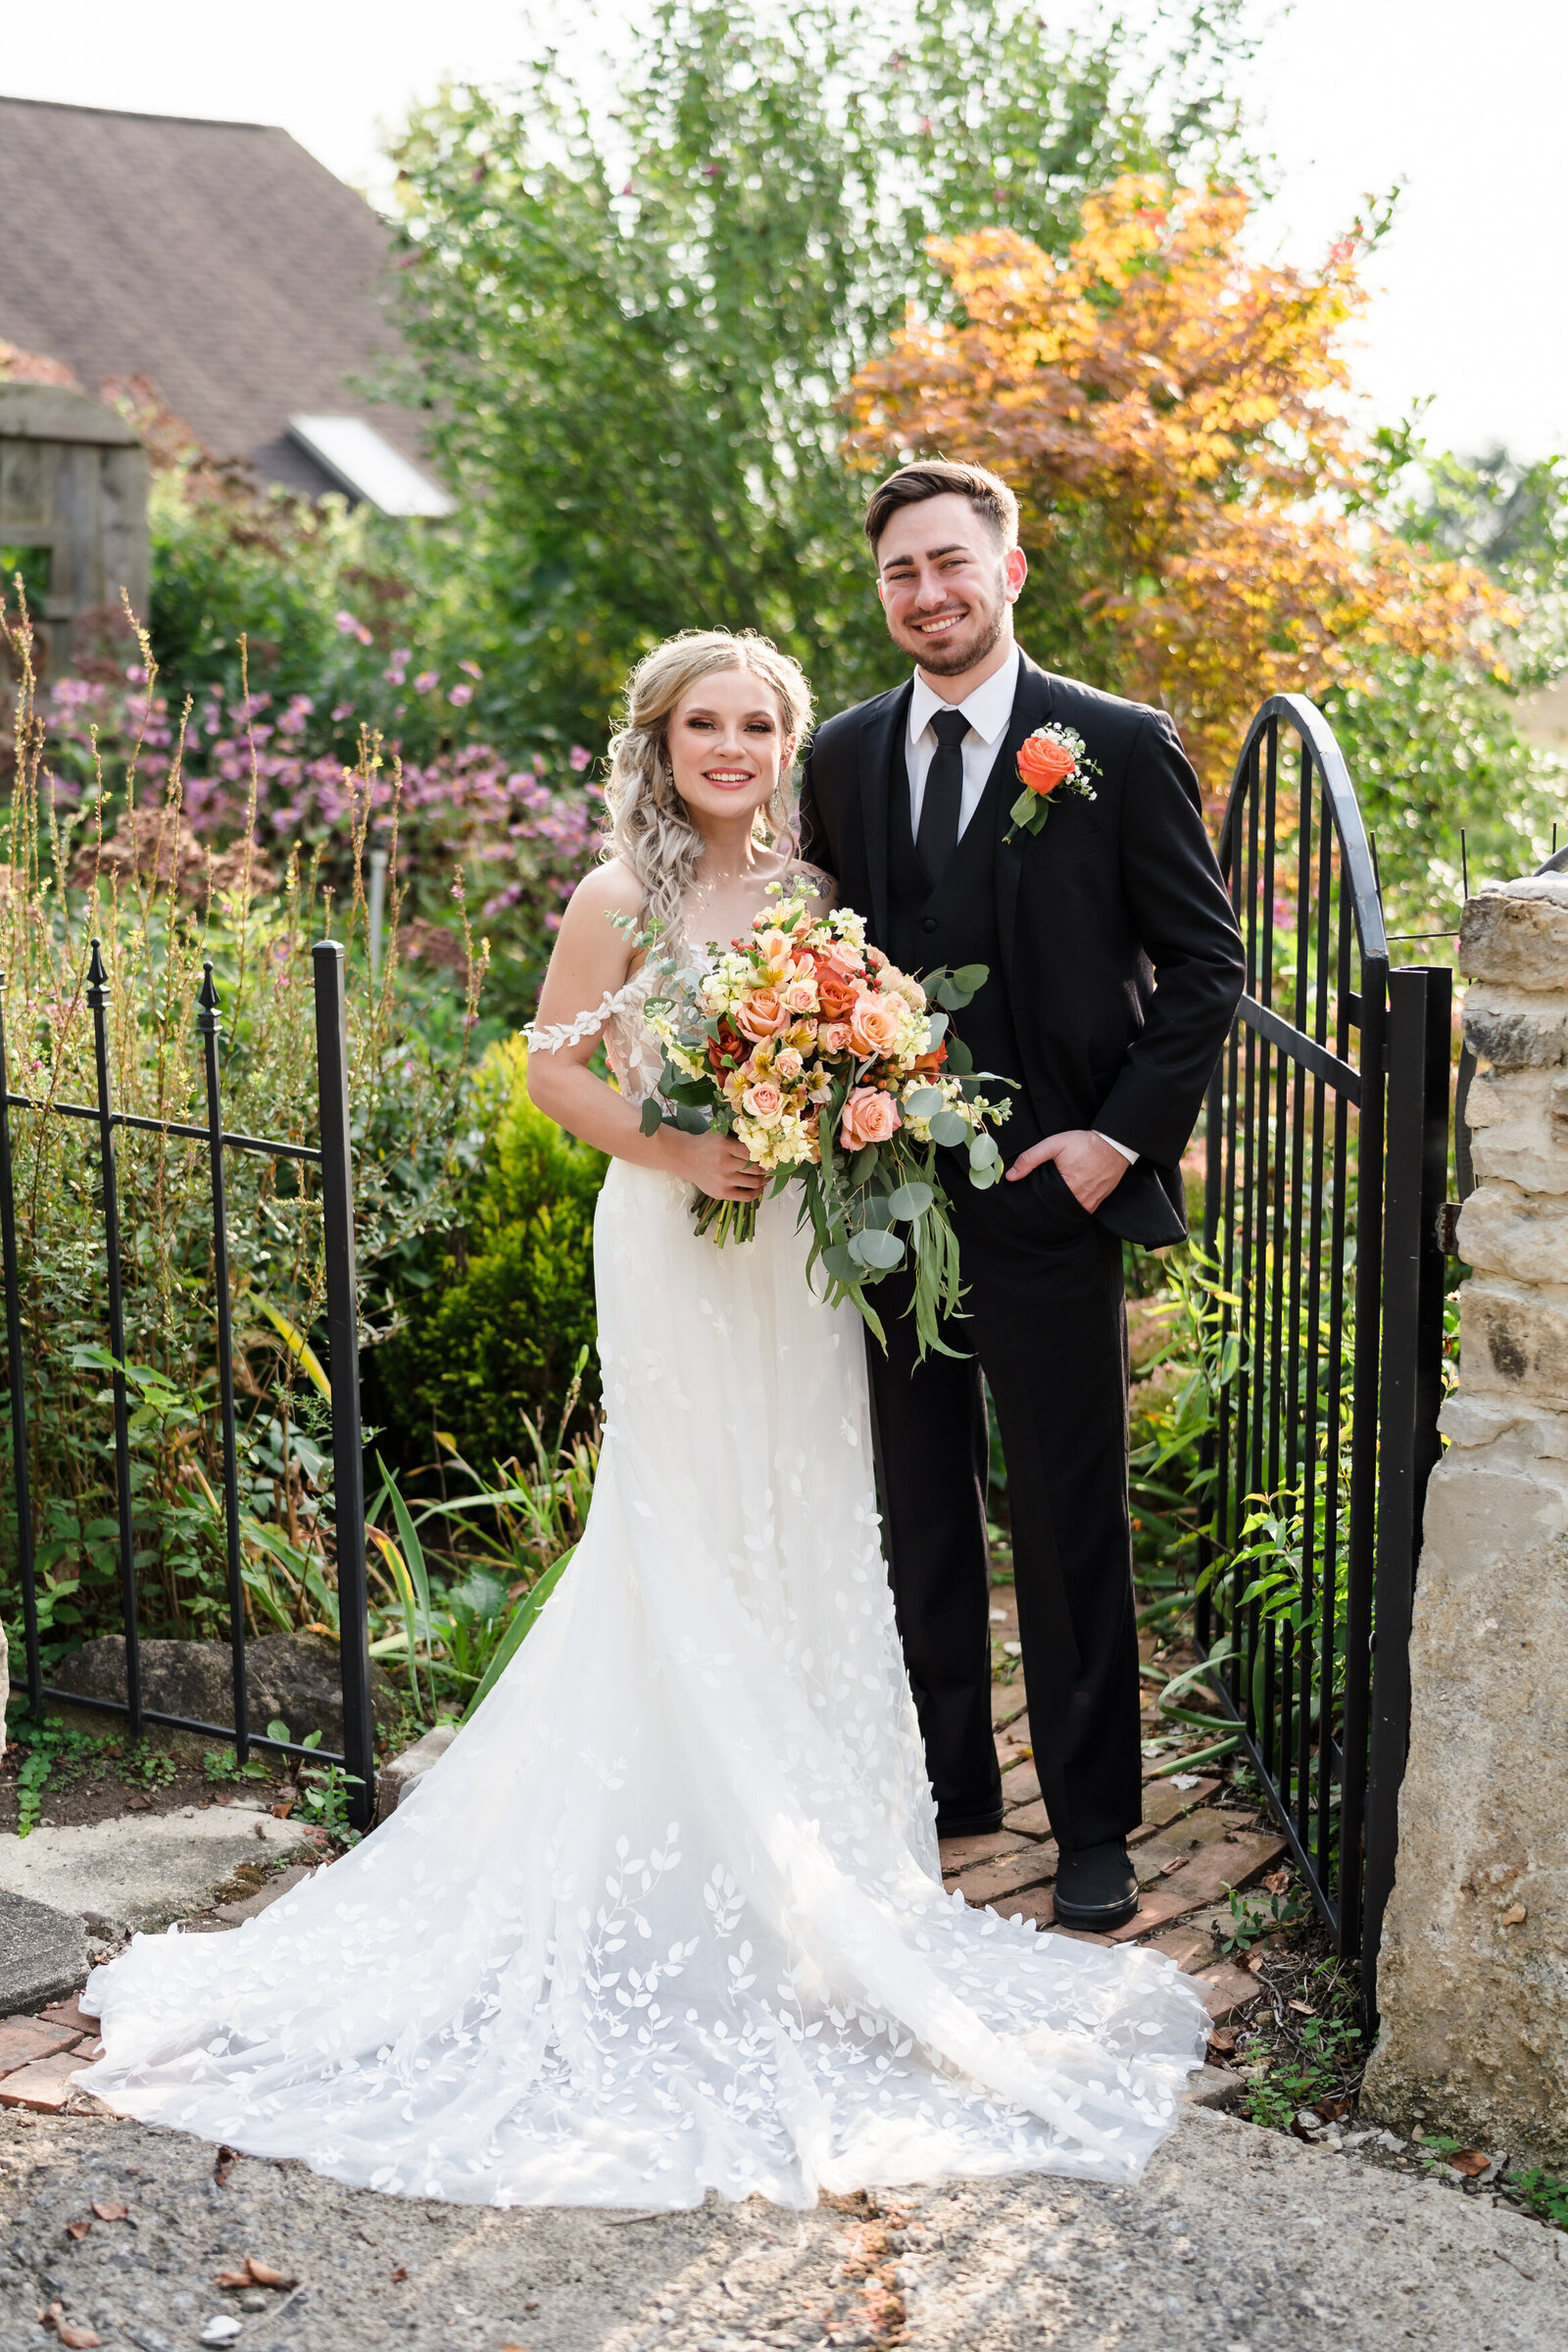 Bride and groom smile while basked in golden light and surrounded by wild flowers